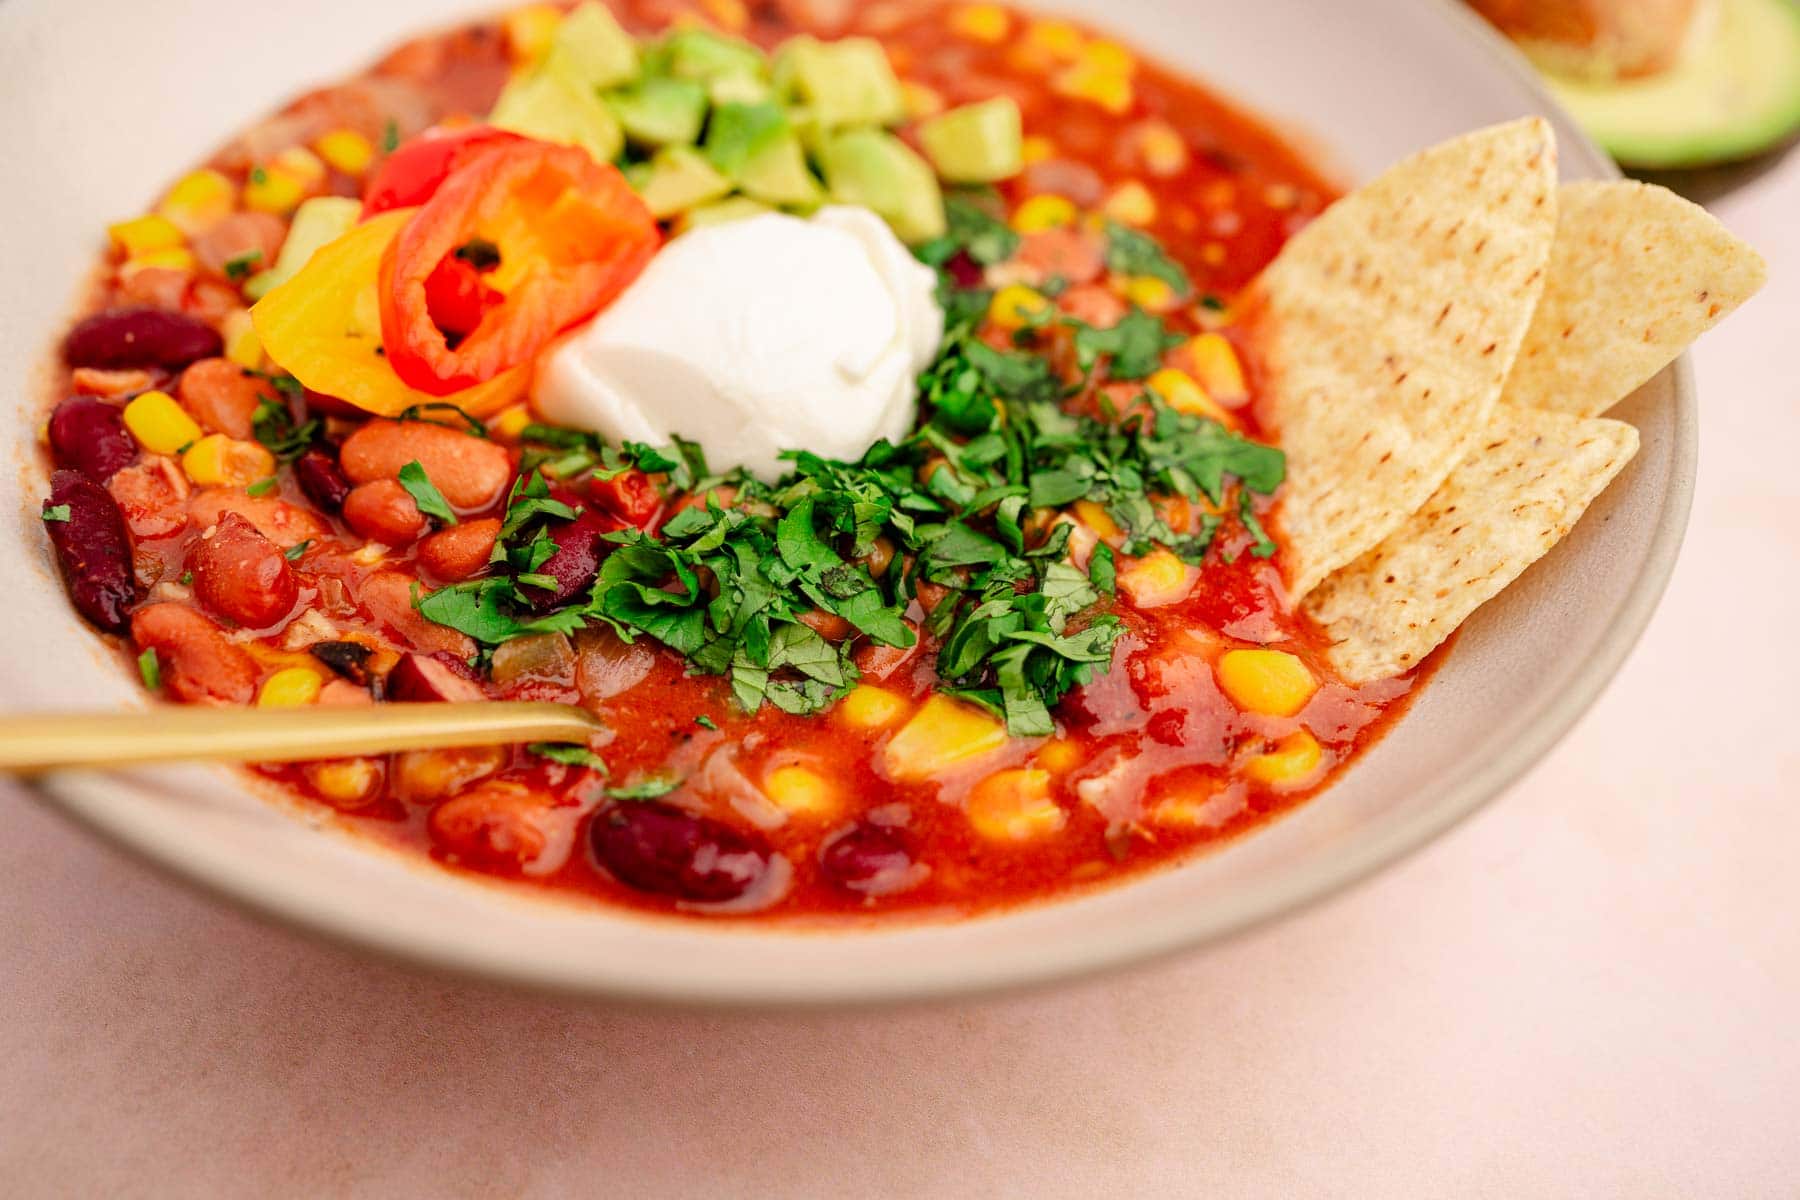 A hearty bowl of slow cooker vegetarian chili with beans, corn, sour cream, and avocado.